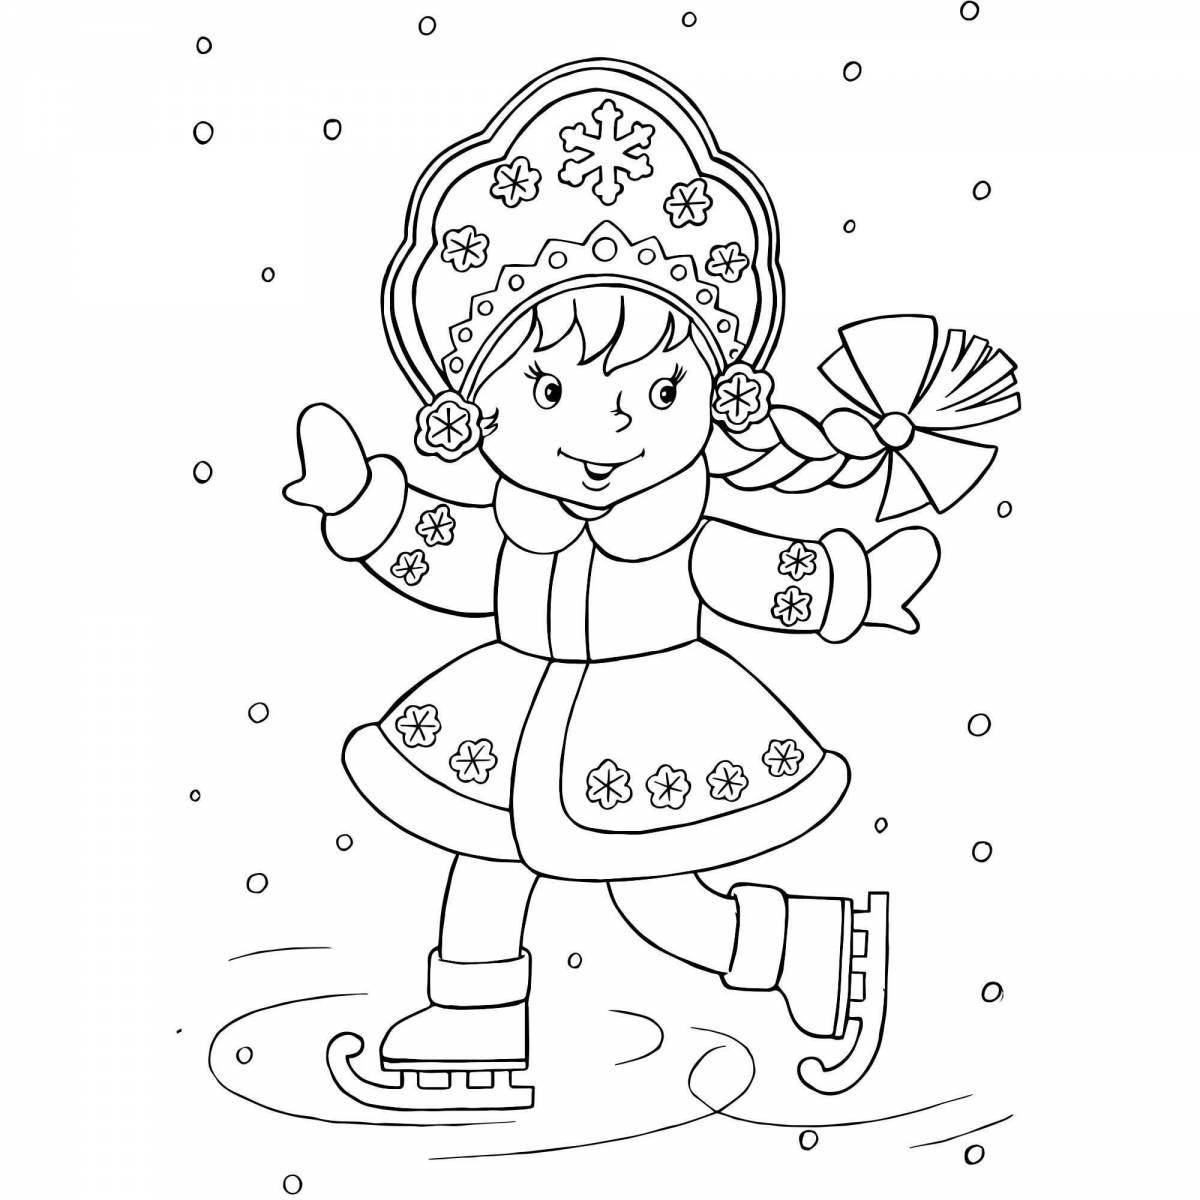 Blessed Snow Maiden coloring book for kids